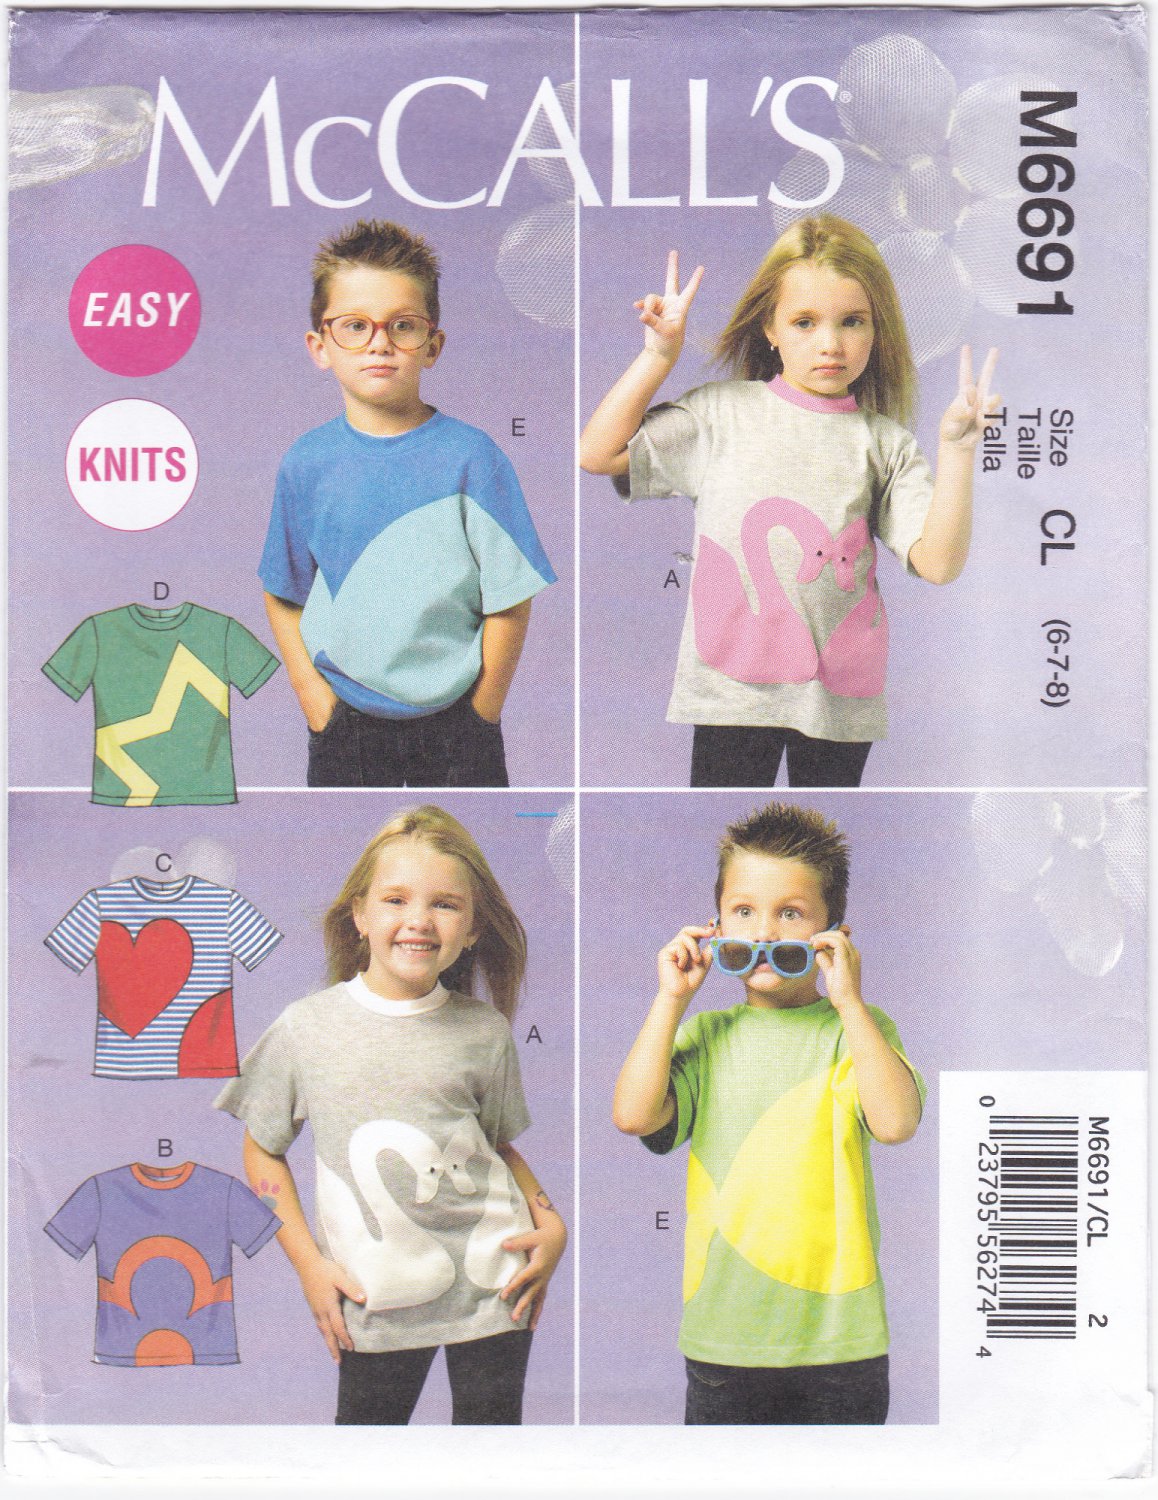 McCall's 6691 M6691 Girls Boys Sizes 6-7-8 Sewing Pattern Kids Childrens Tops with AppliquÃ©s  Easy